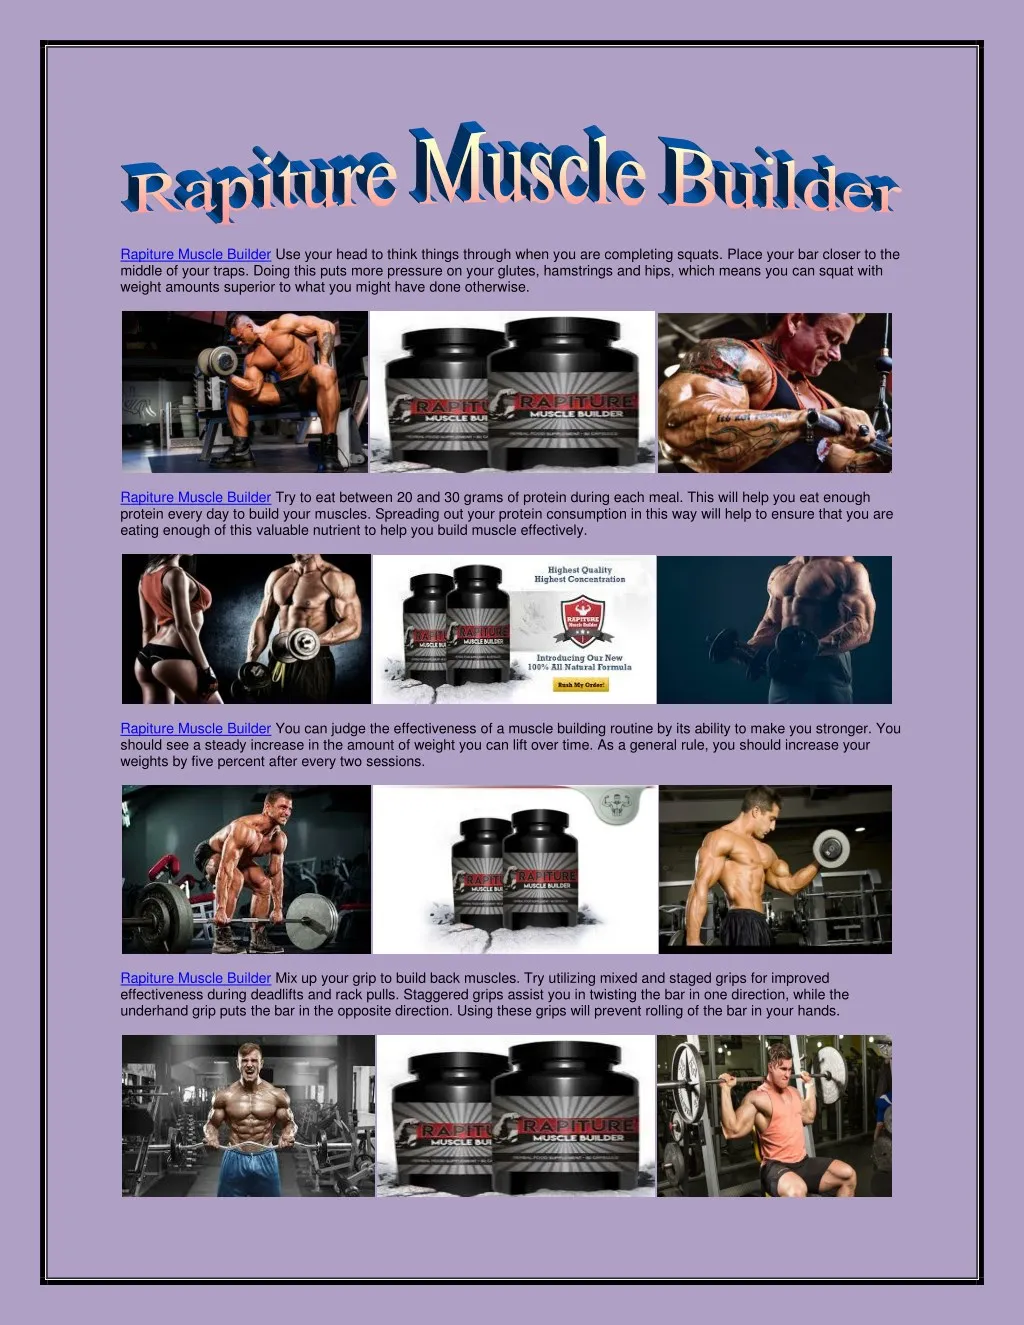 rapiture muscle builder use your head to think